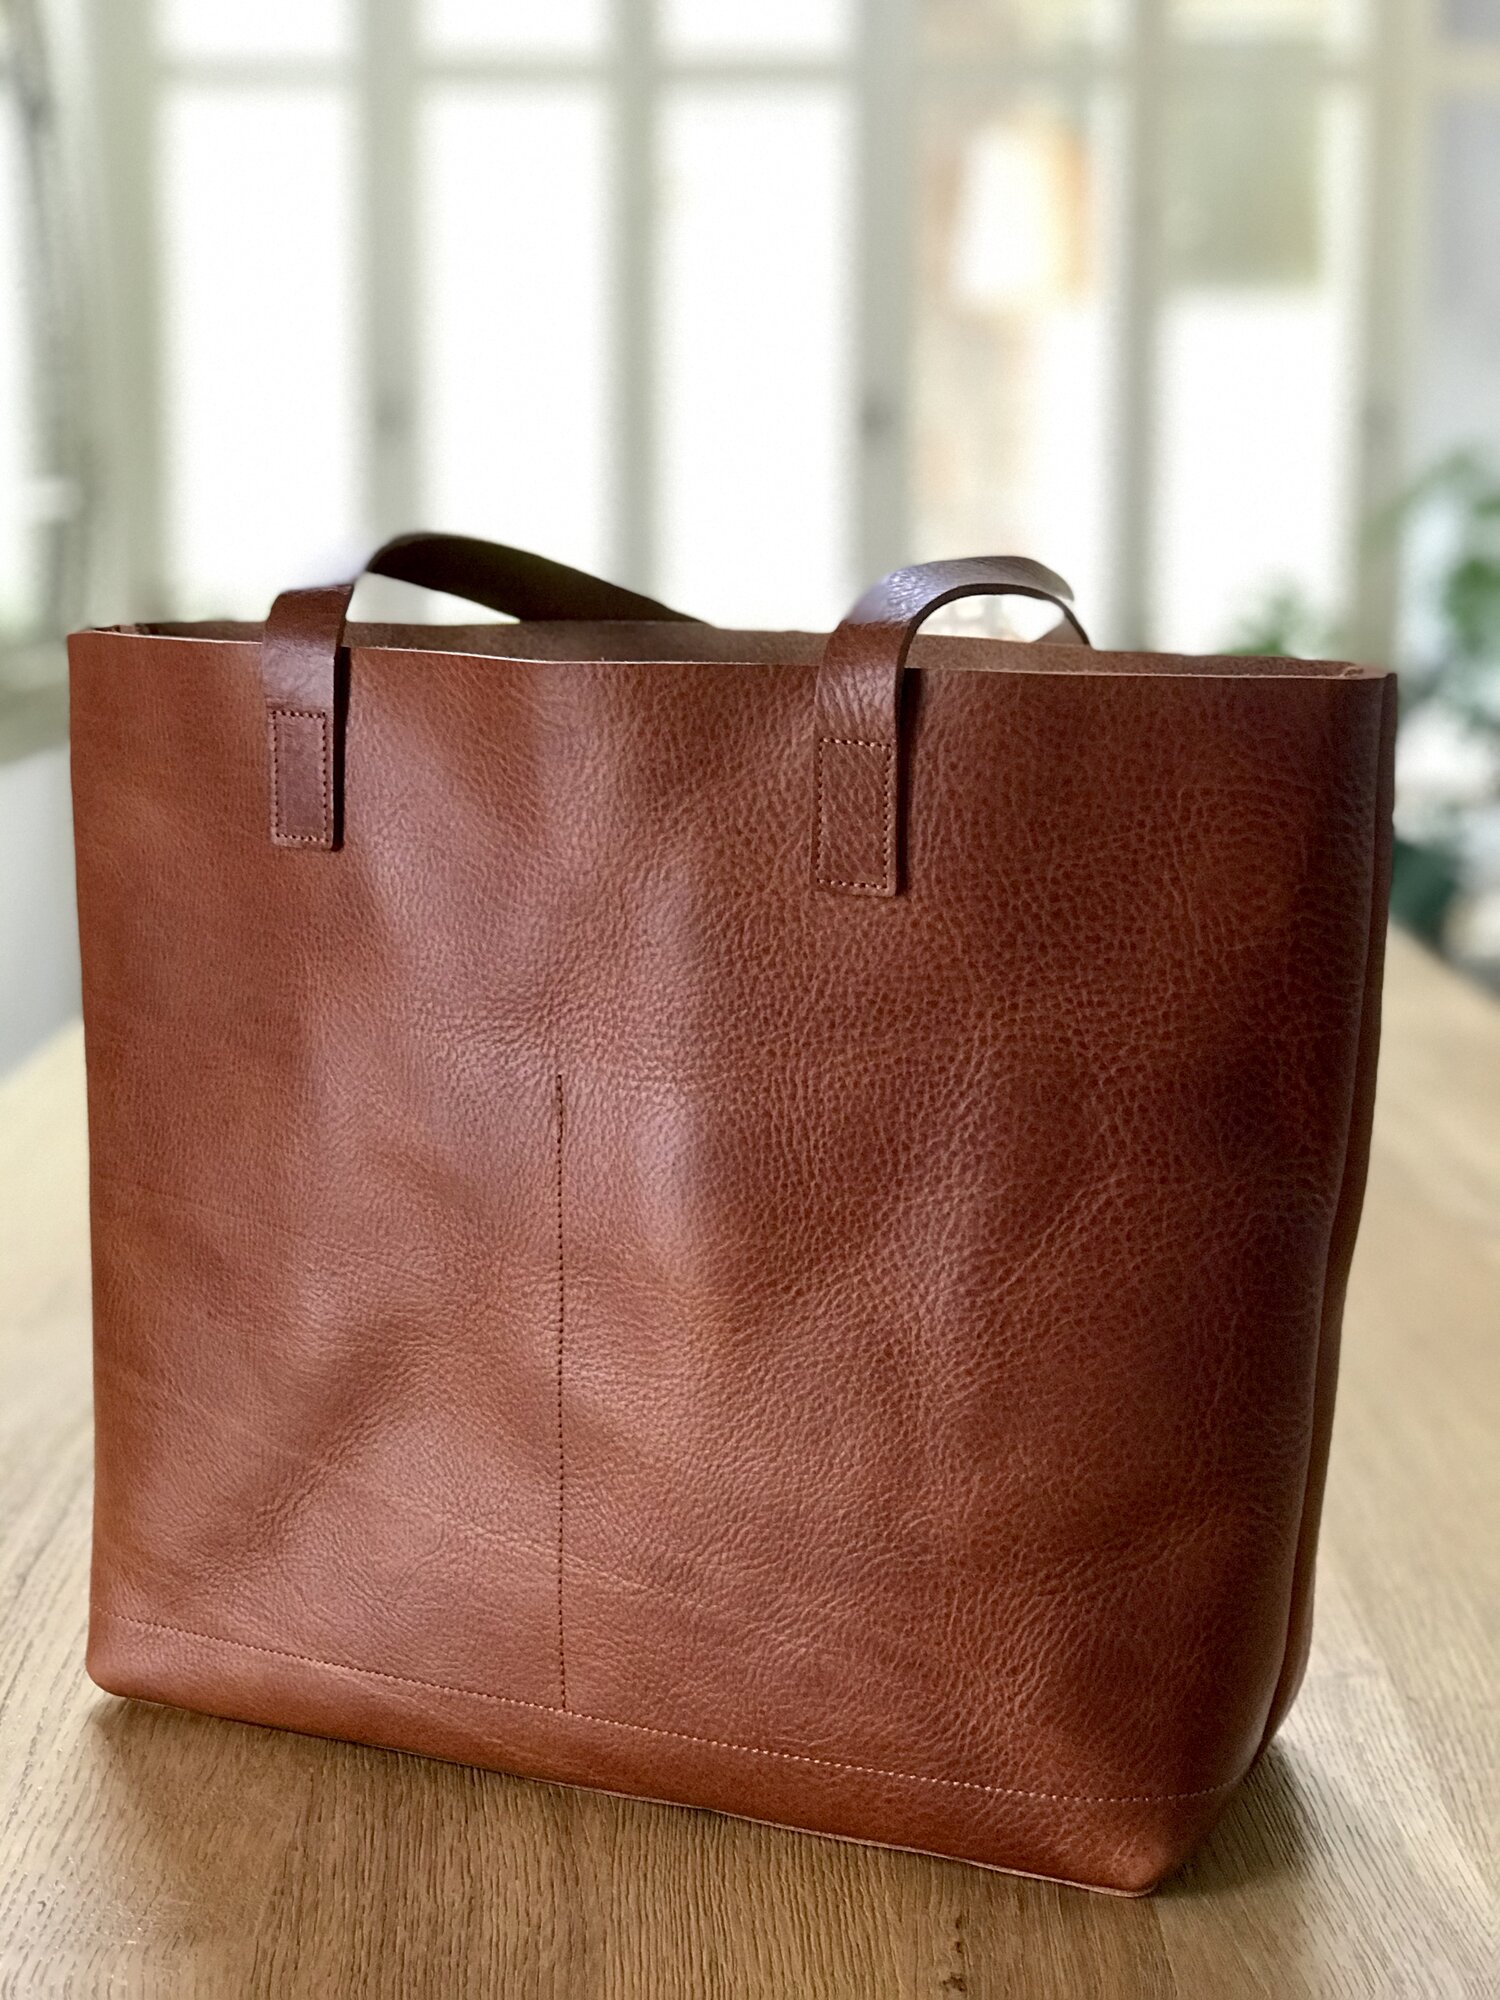 Tan / Cognac Leather tote bag with large outside pocket. The